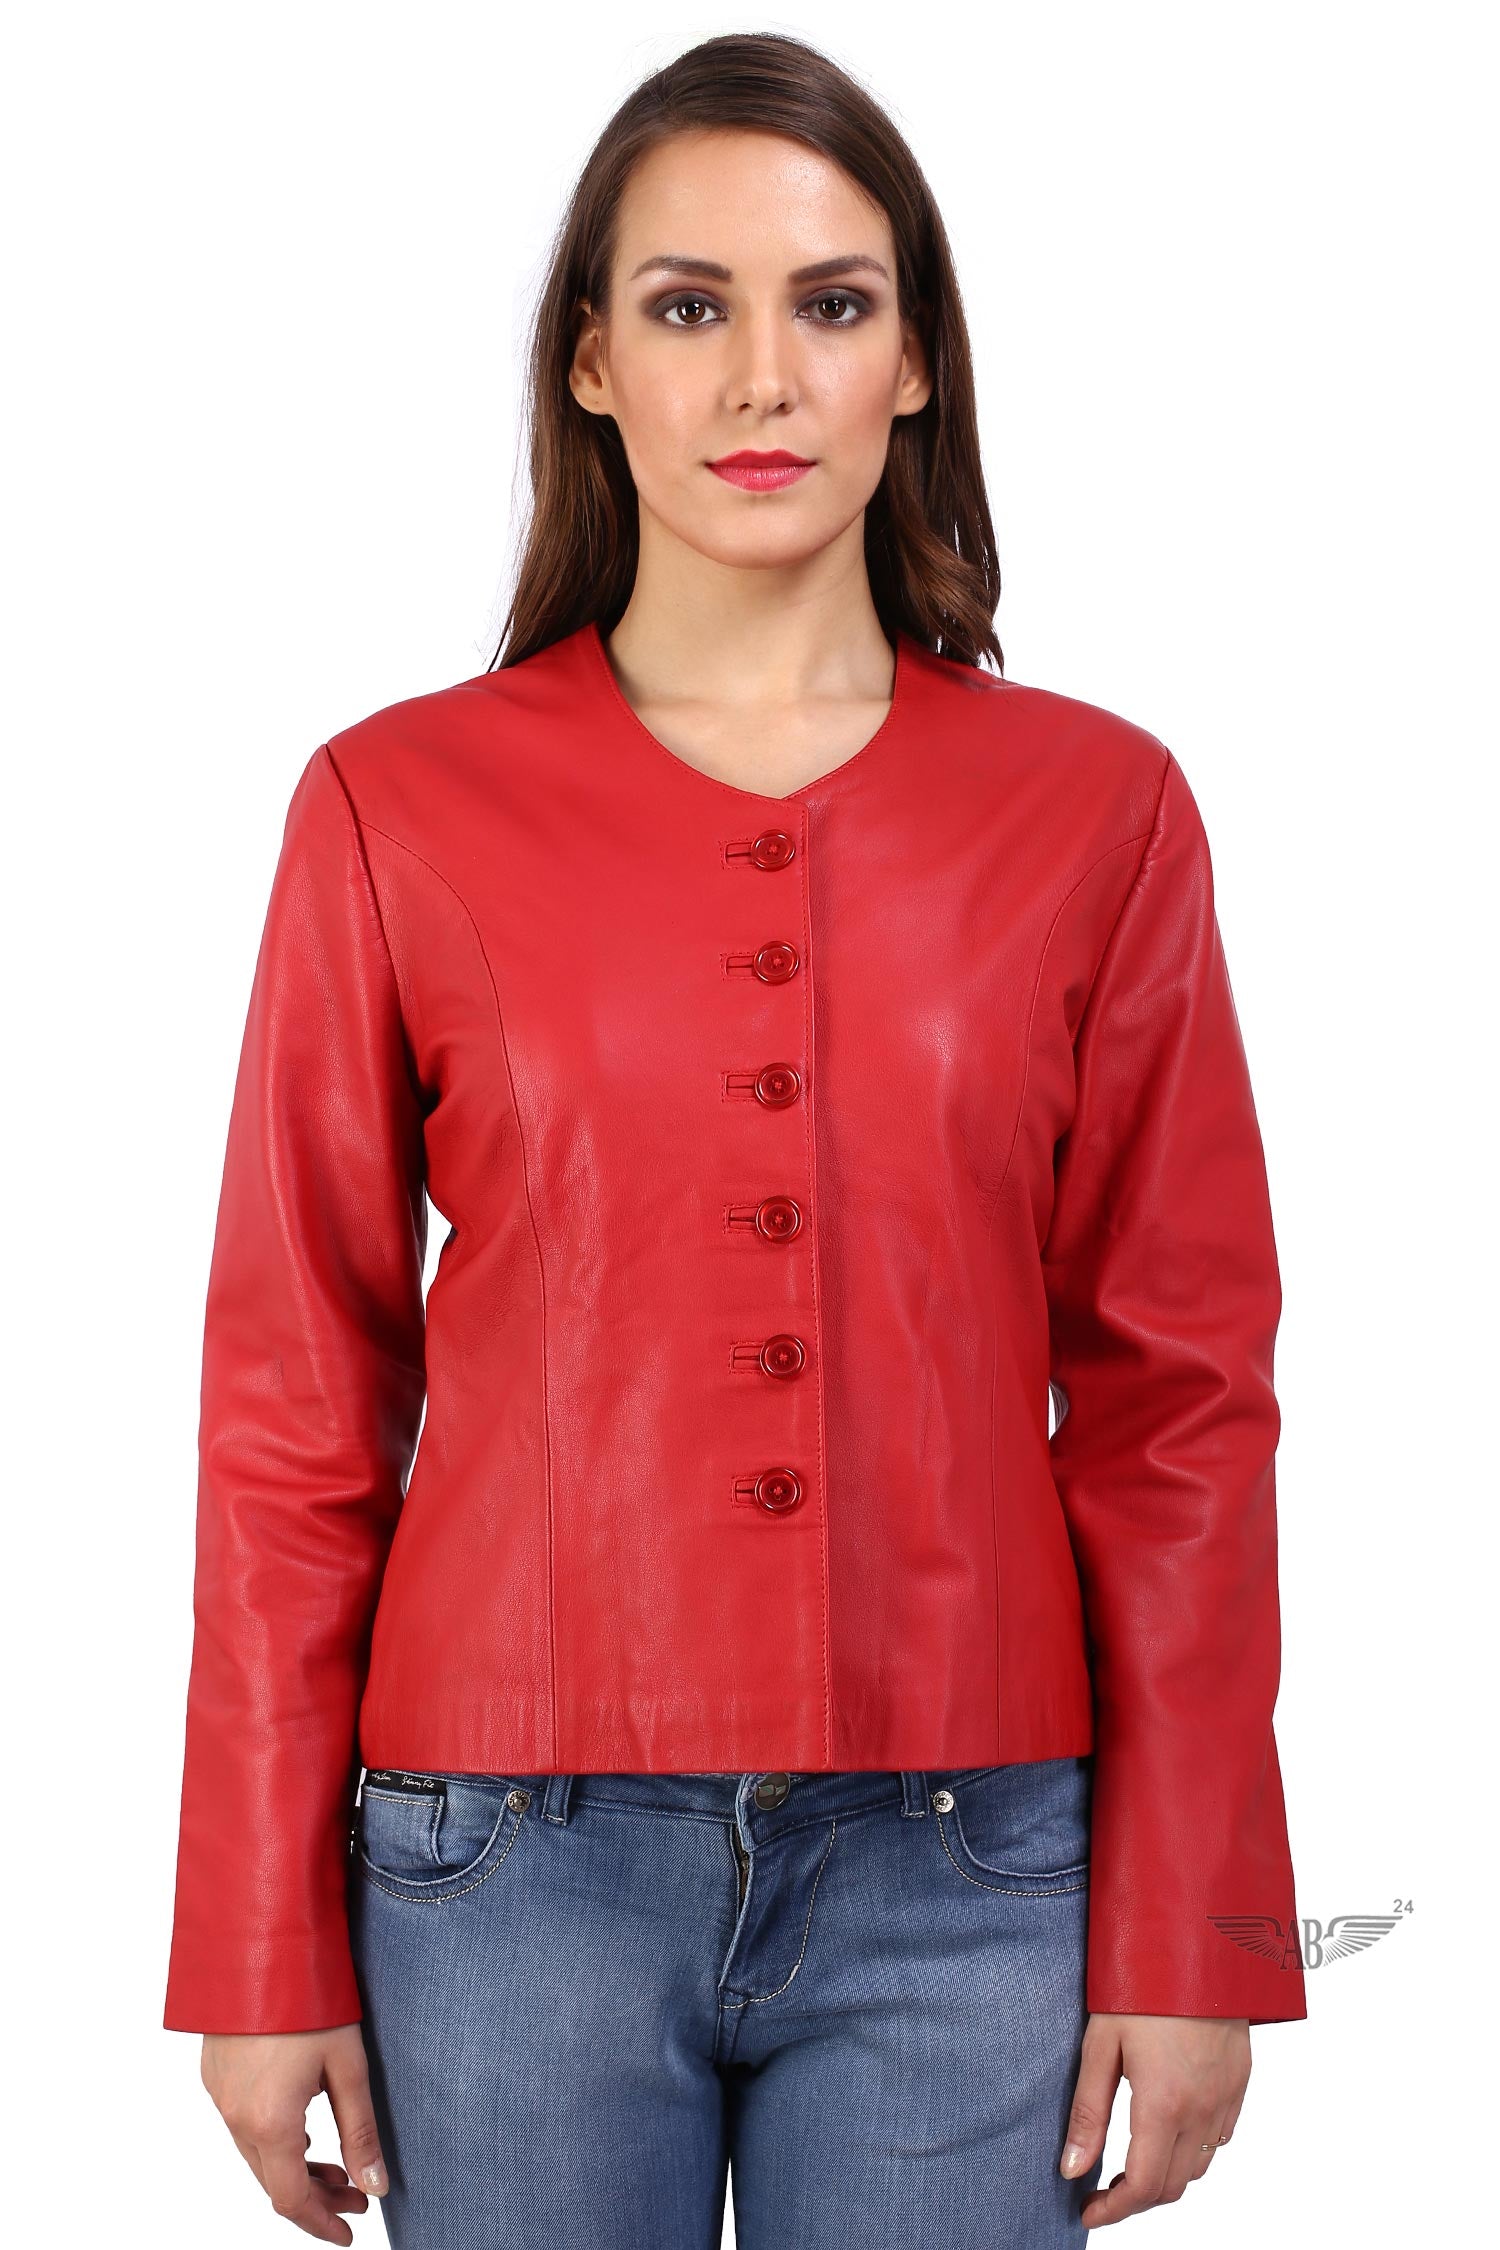 Model wearing red CLASSIC CHANNEL JACKET